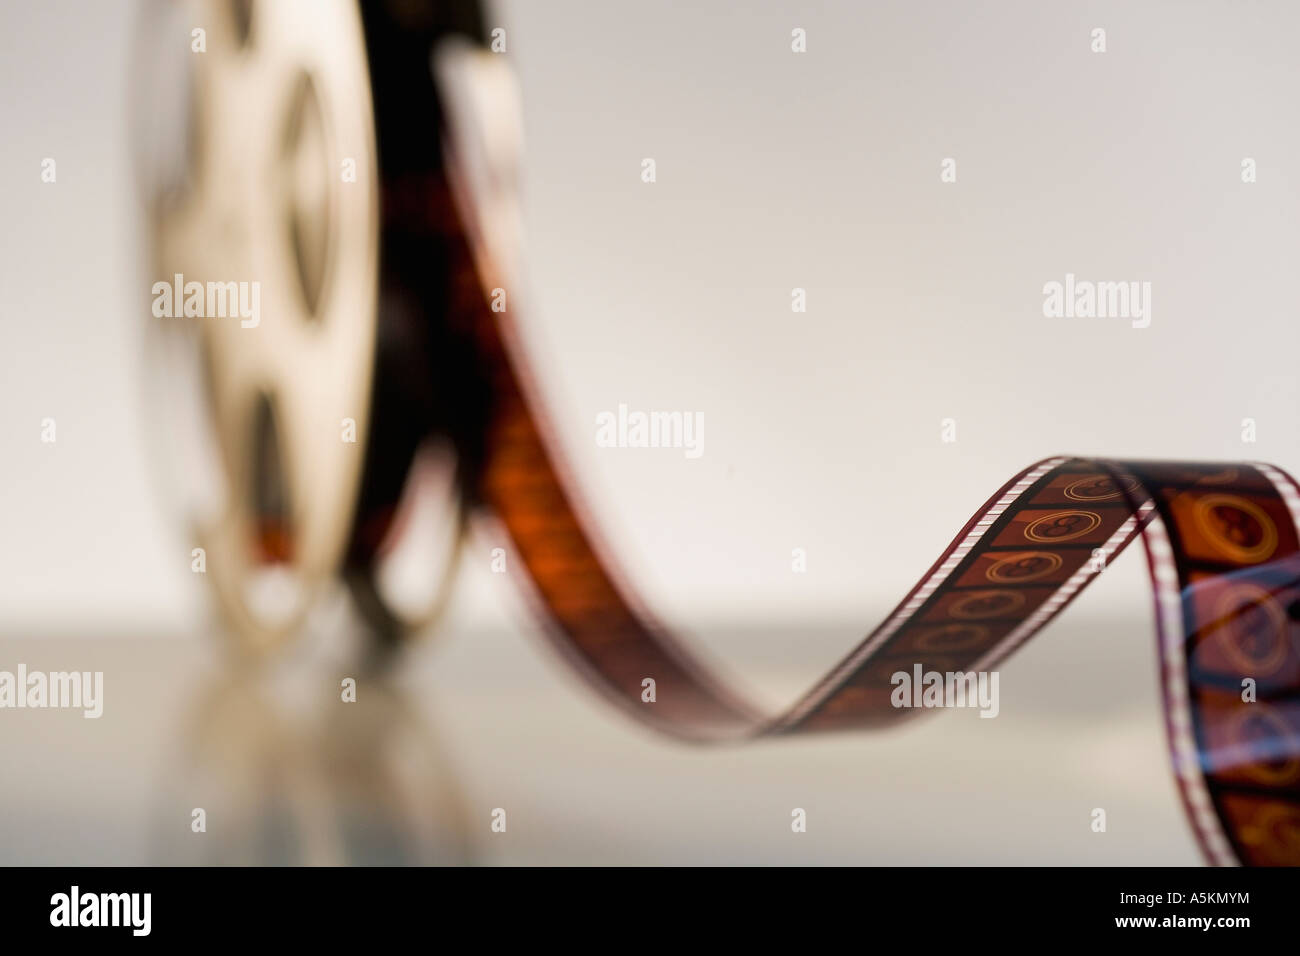 Close up of reel of movie film Stock Photo